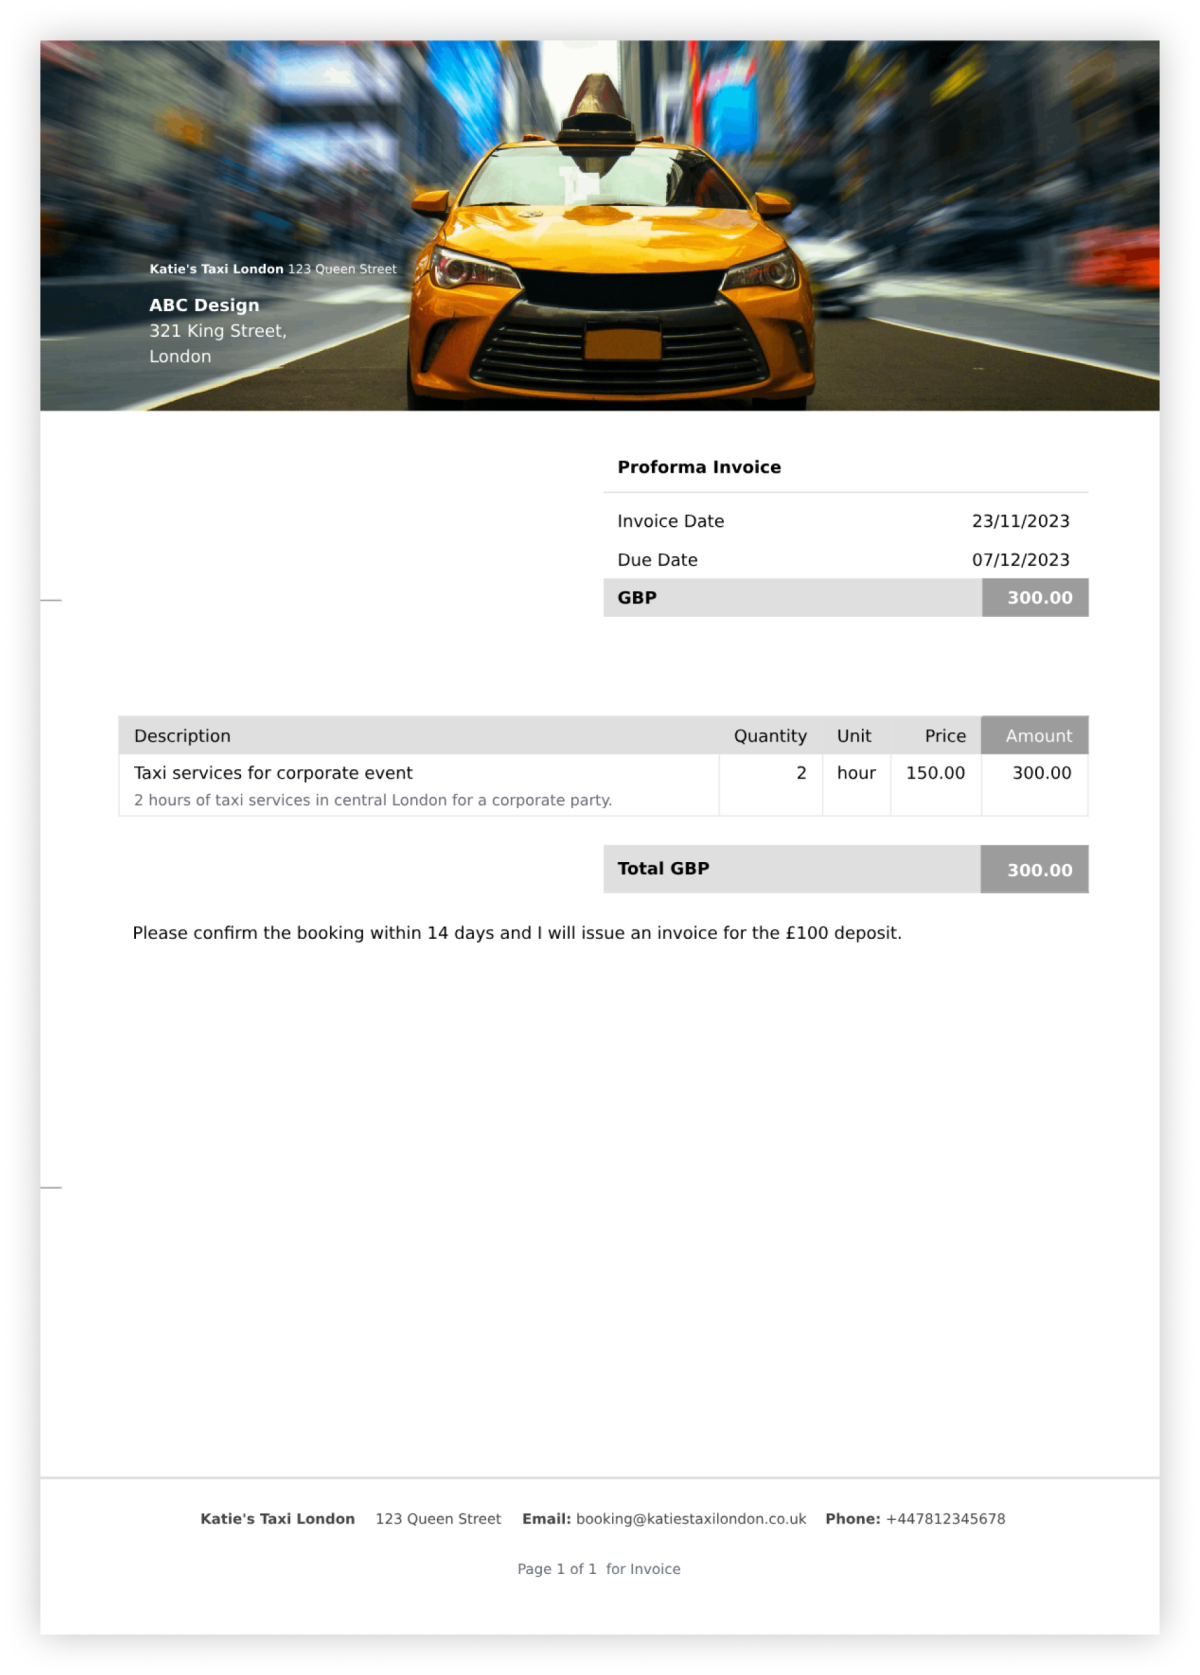 Sample proforma invoice for a taxi company in London with all of the required proforma invoice fields. Created with SumUp Invoices.